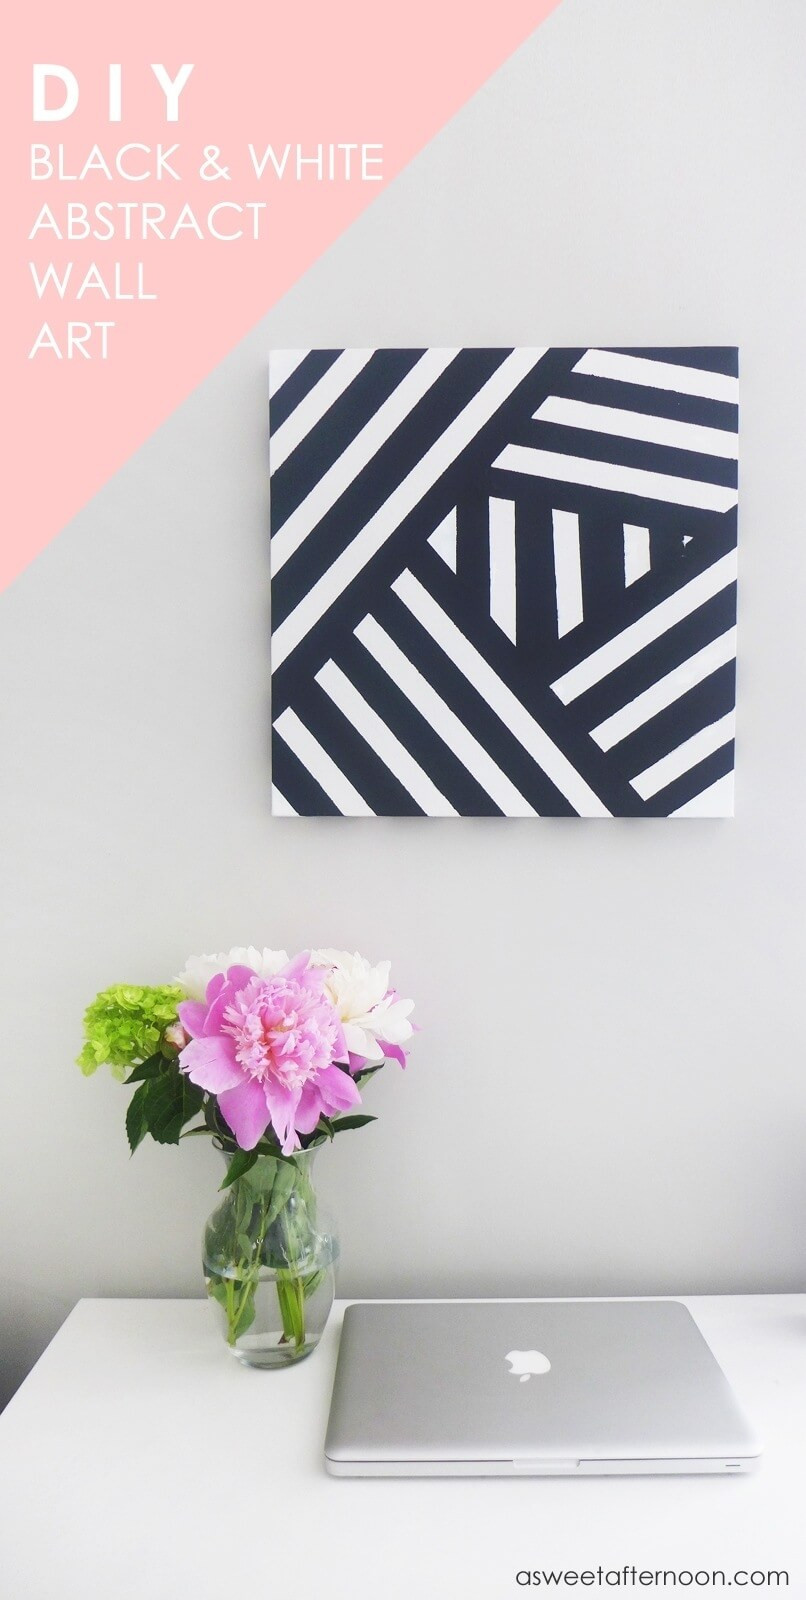 Diy Wall Art
 36 Best DIY Wall Art Ideas Designs and Decorations for 2019